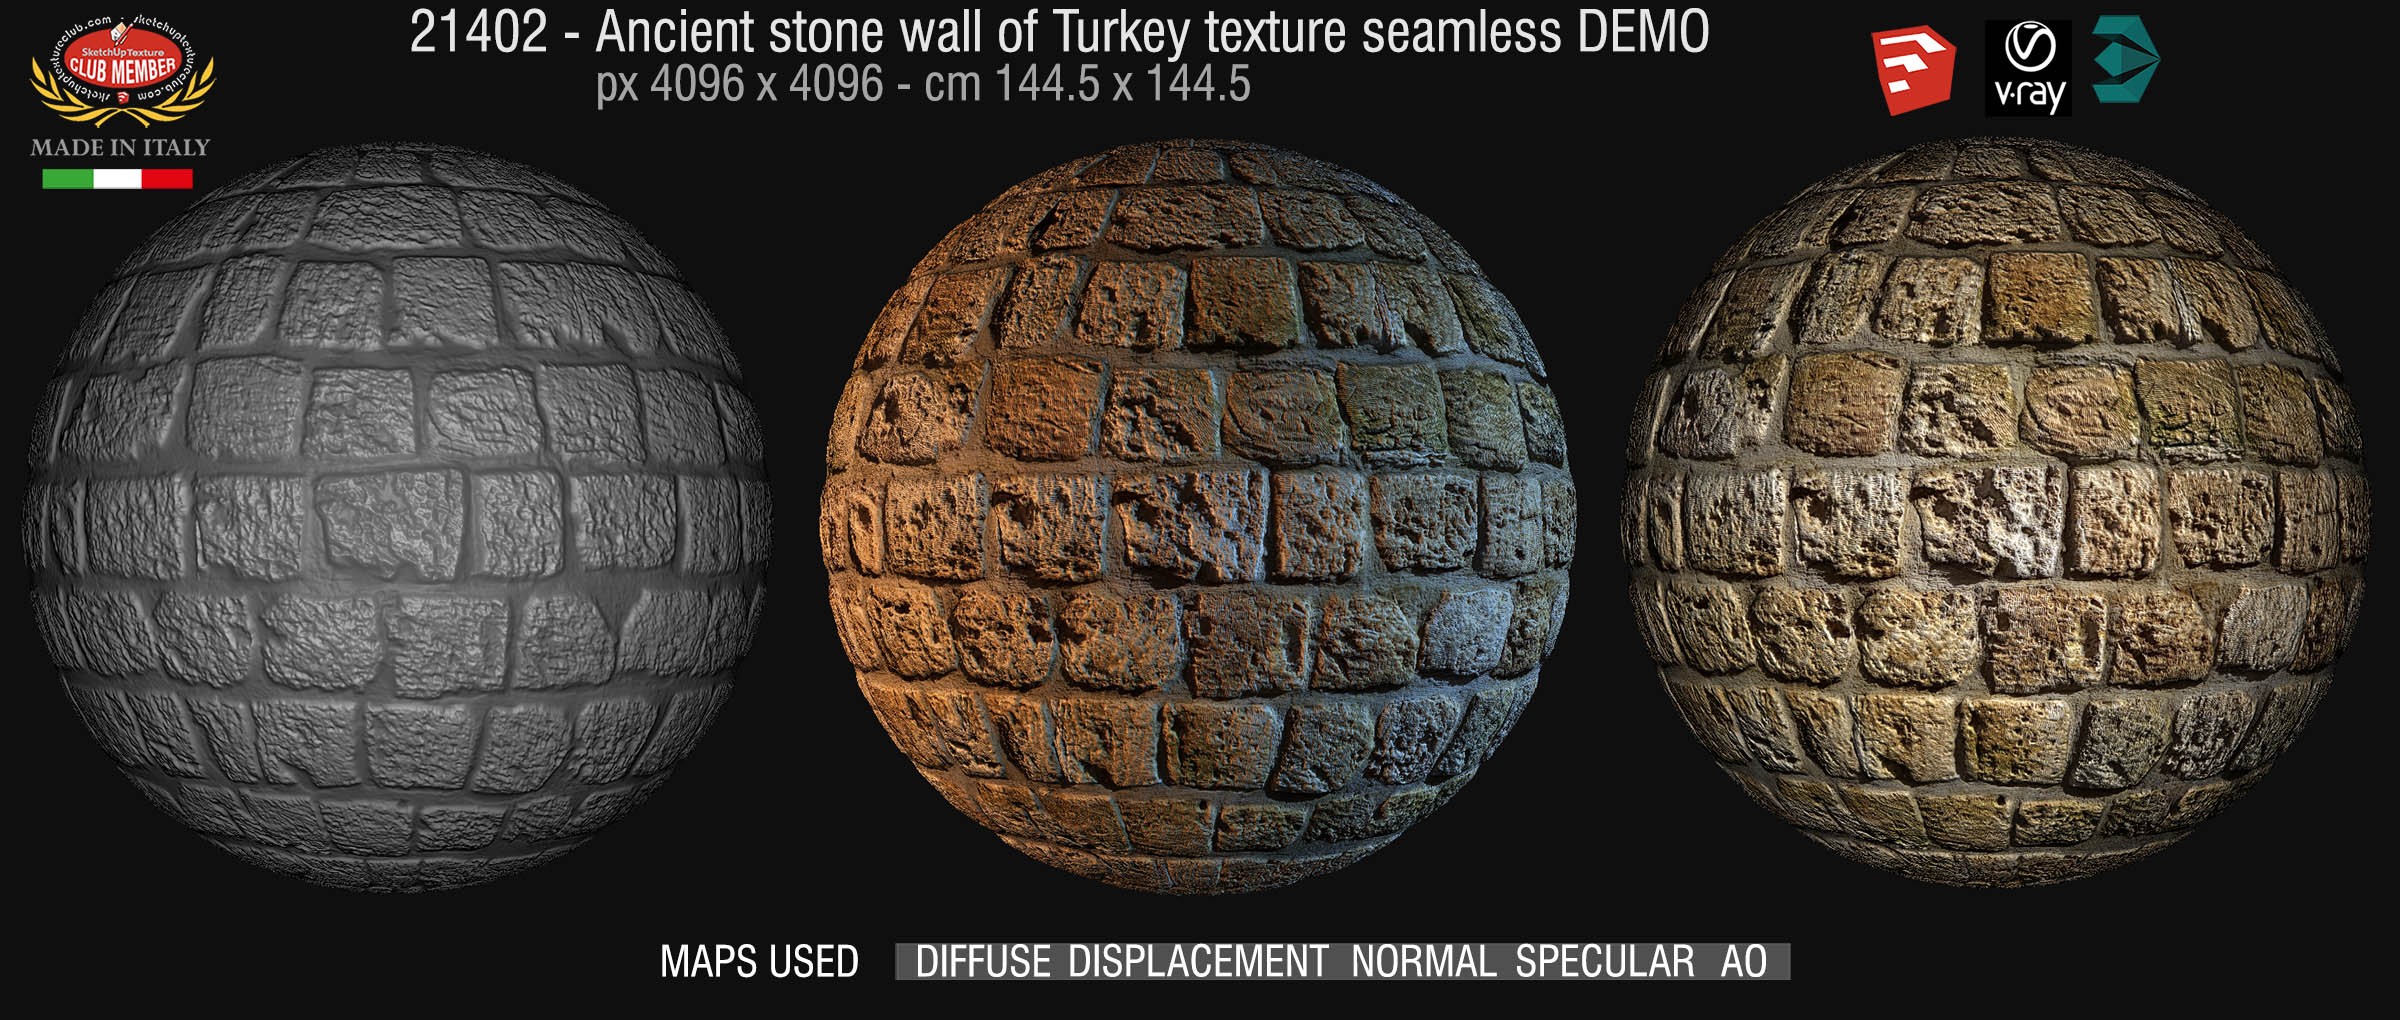 21402 Ancient stone wall of Turkey texture seamless + maps DEMO